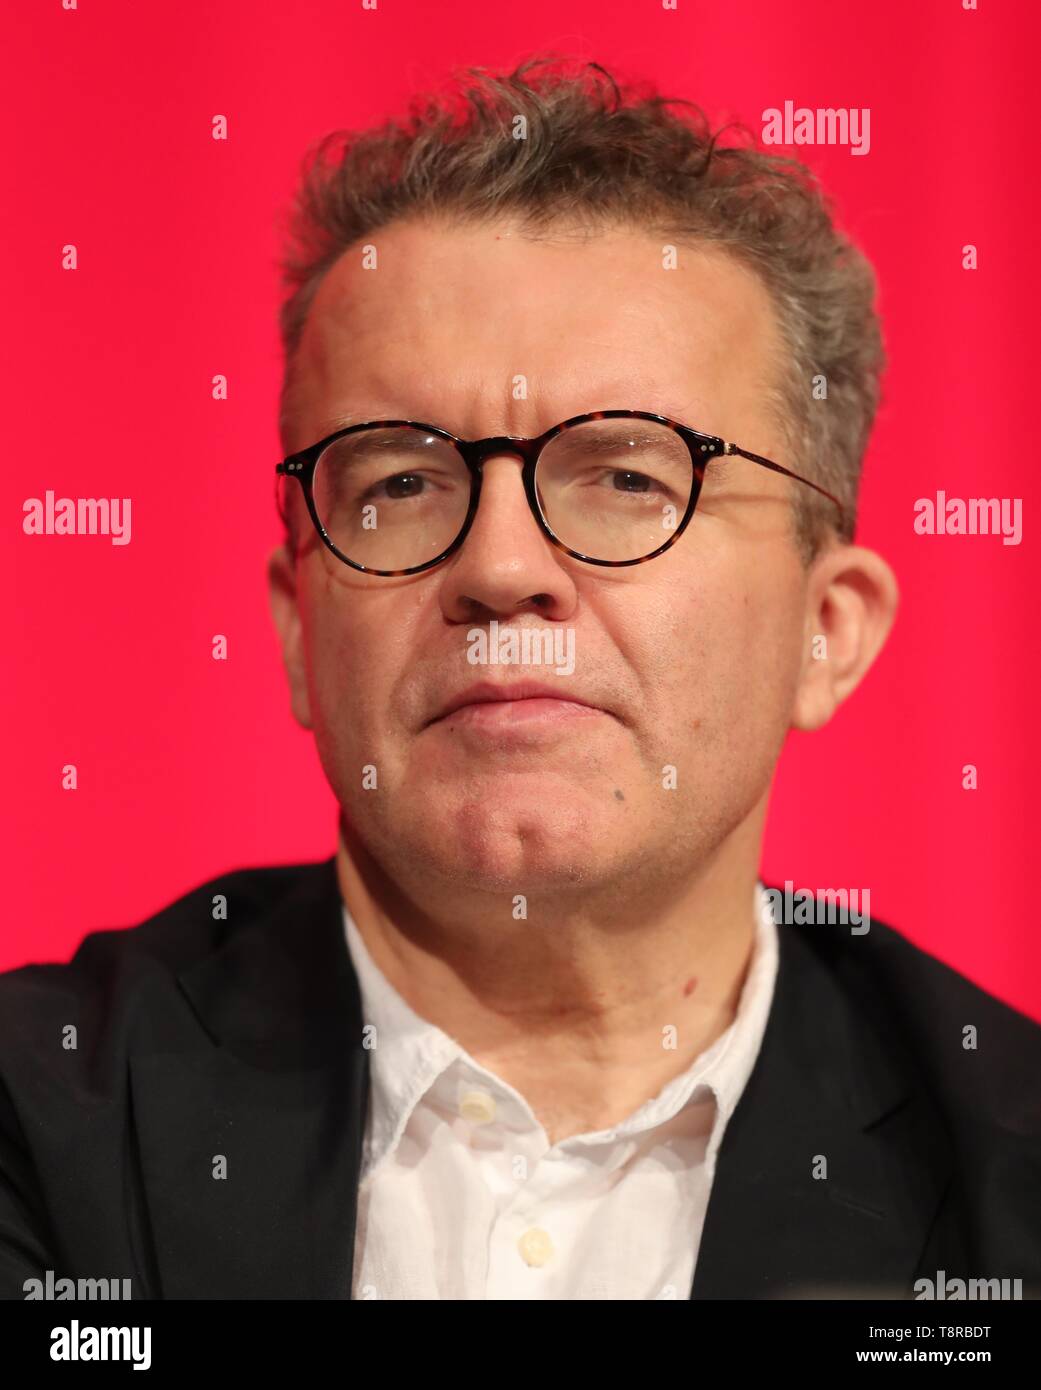 TOM WATSON MP, 2018 Banque D'Images